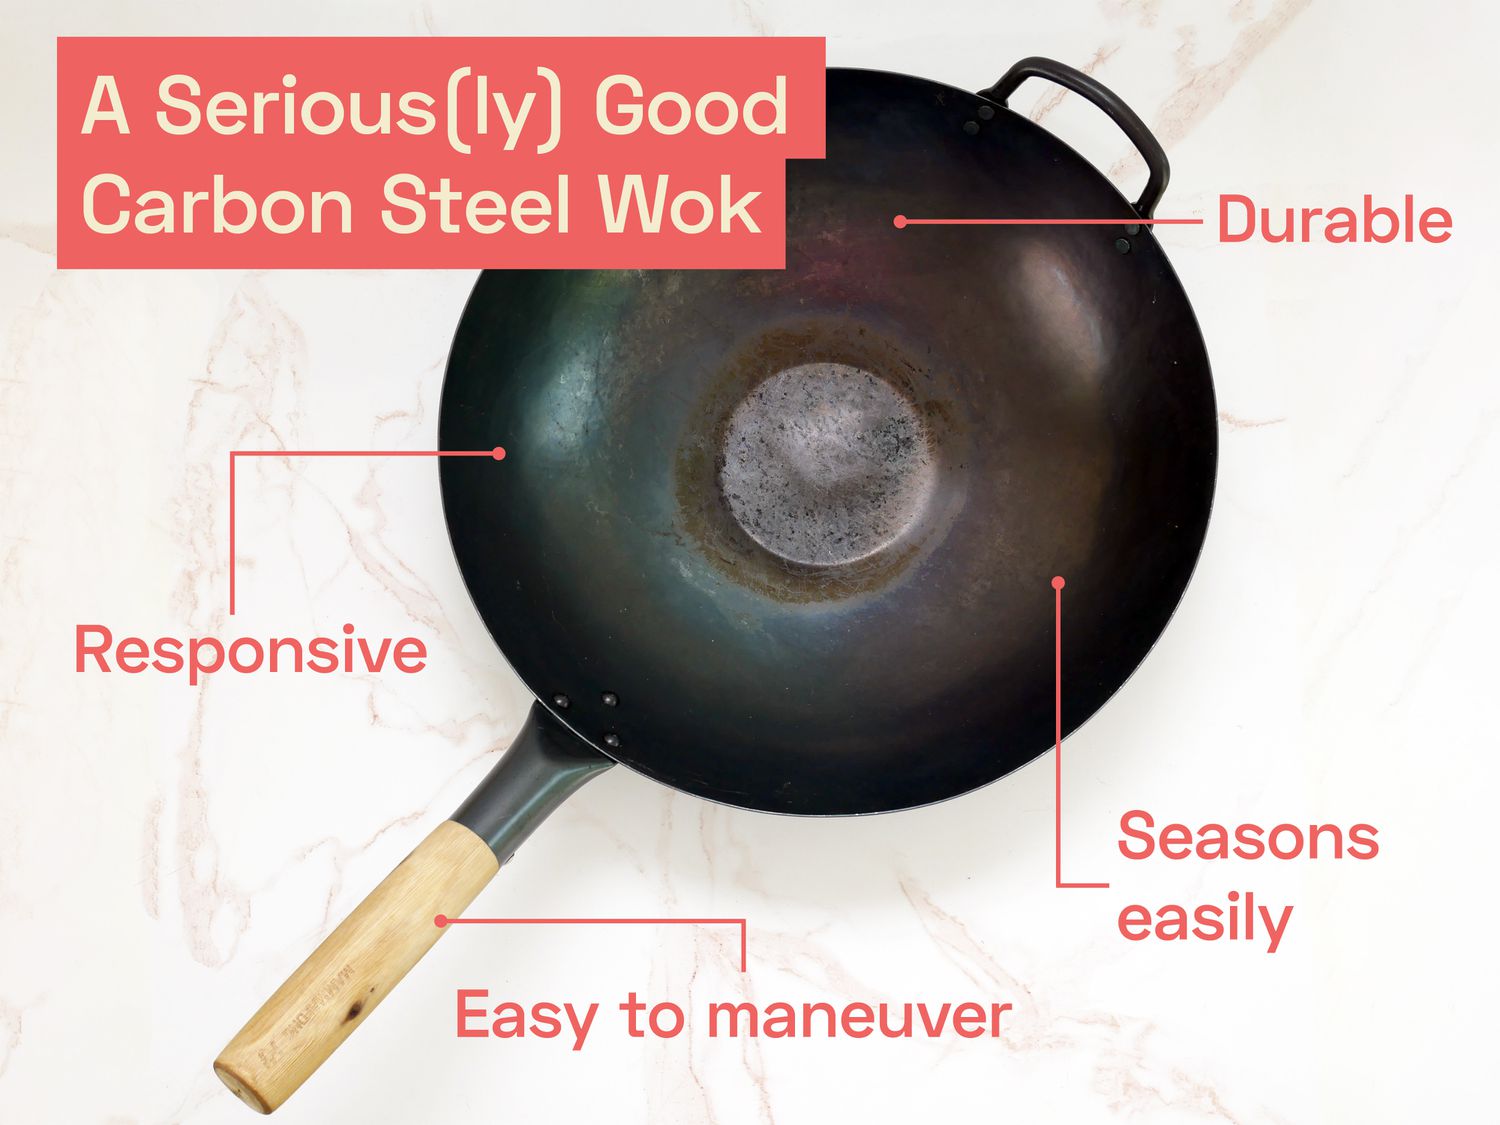 A seriously good carbon steel wok is responsive, durable, seasons easily, and is easy to maneuver